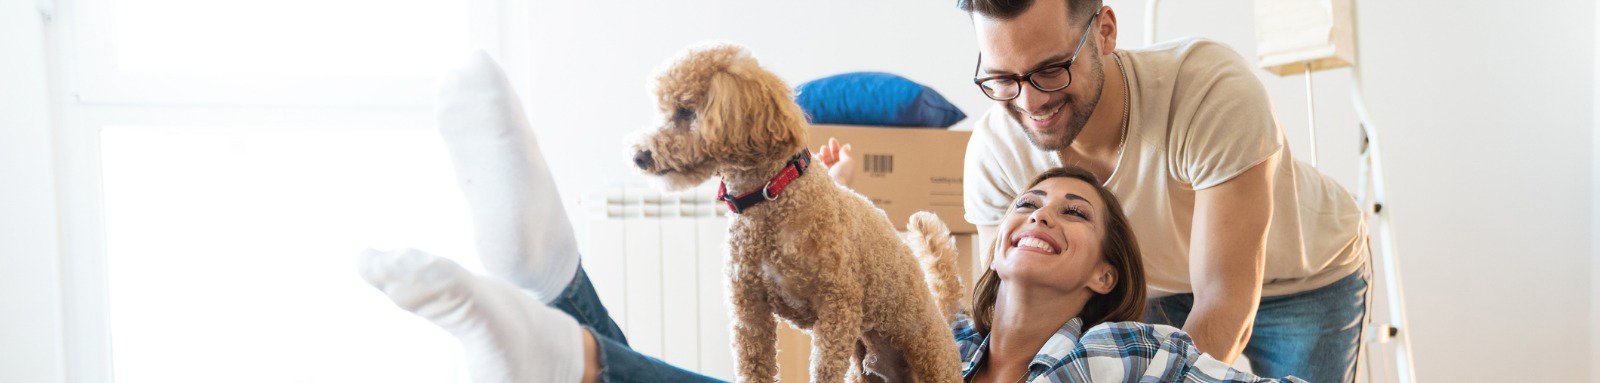 Man and woman playing with dog and packing boxes